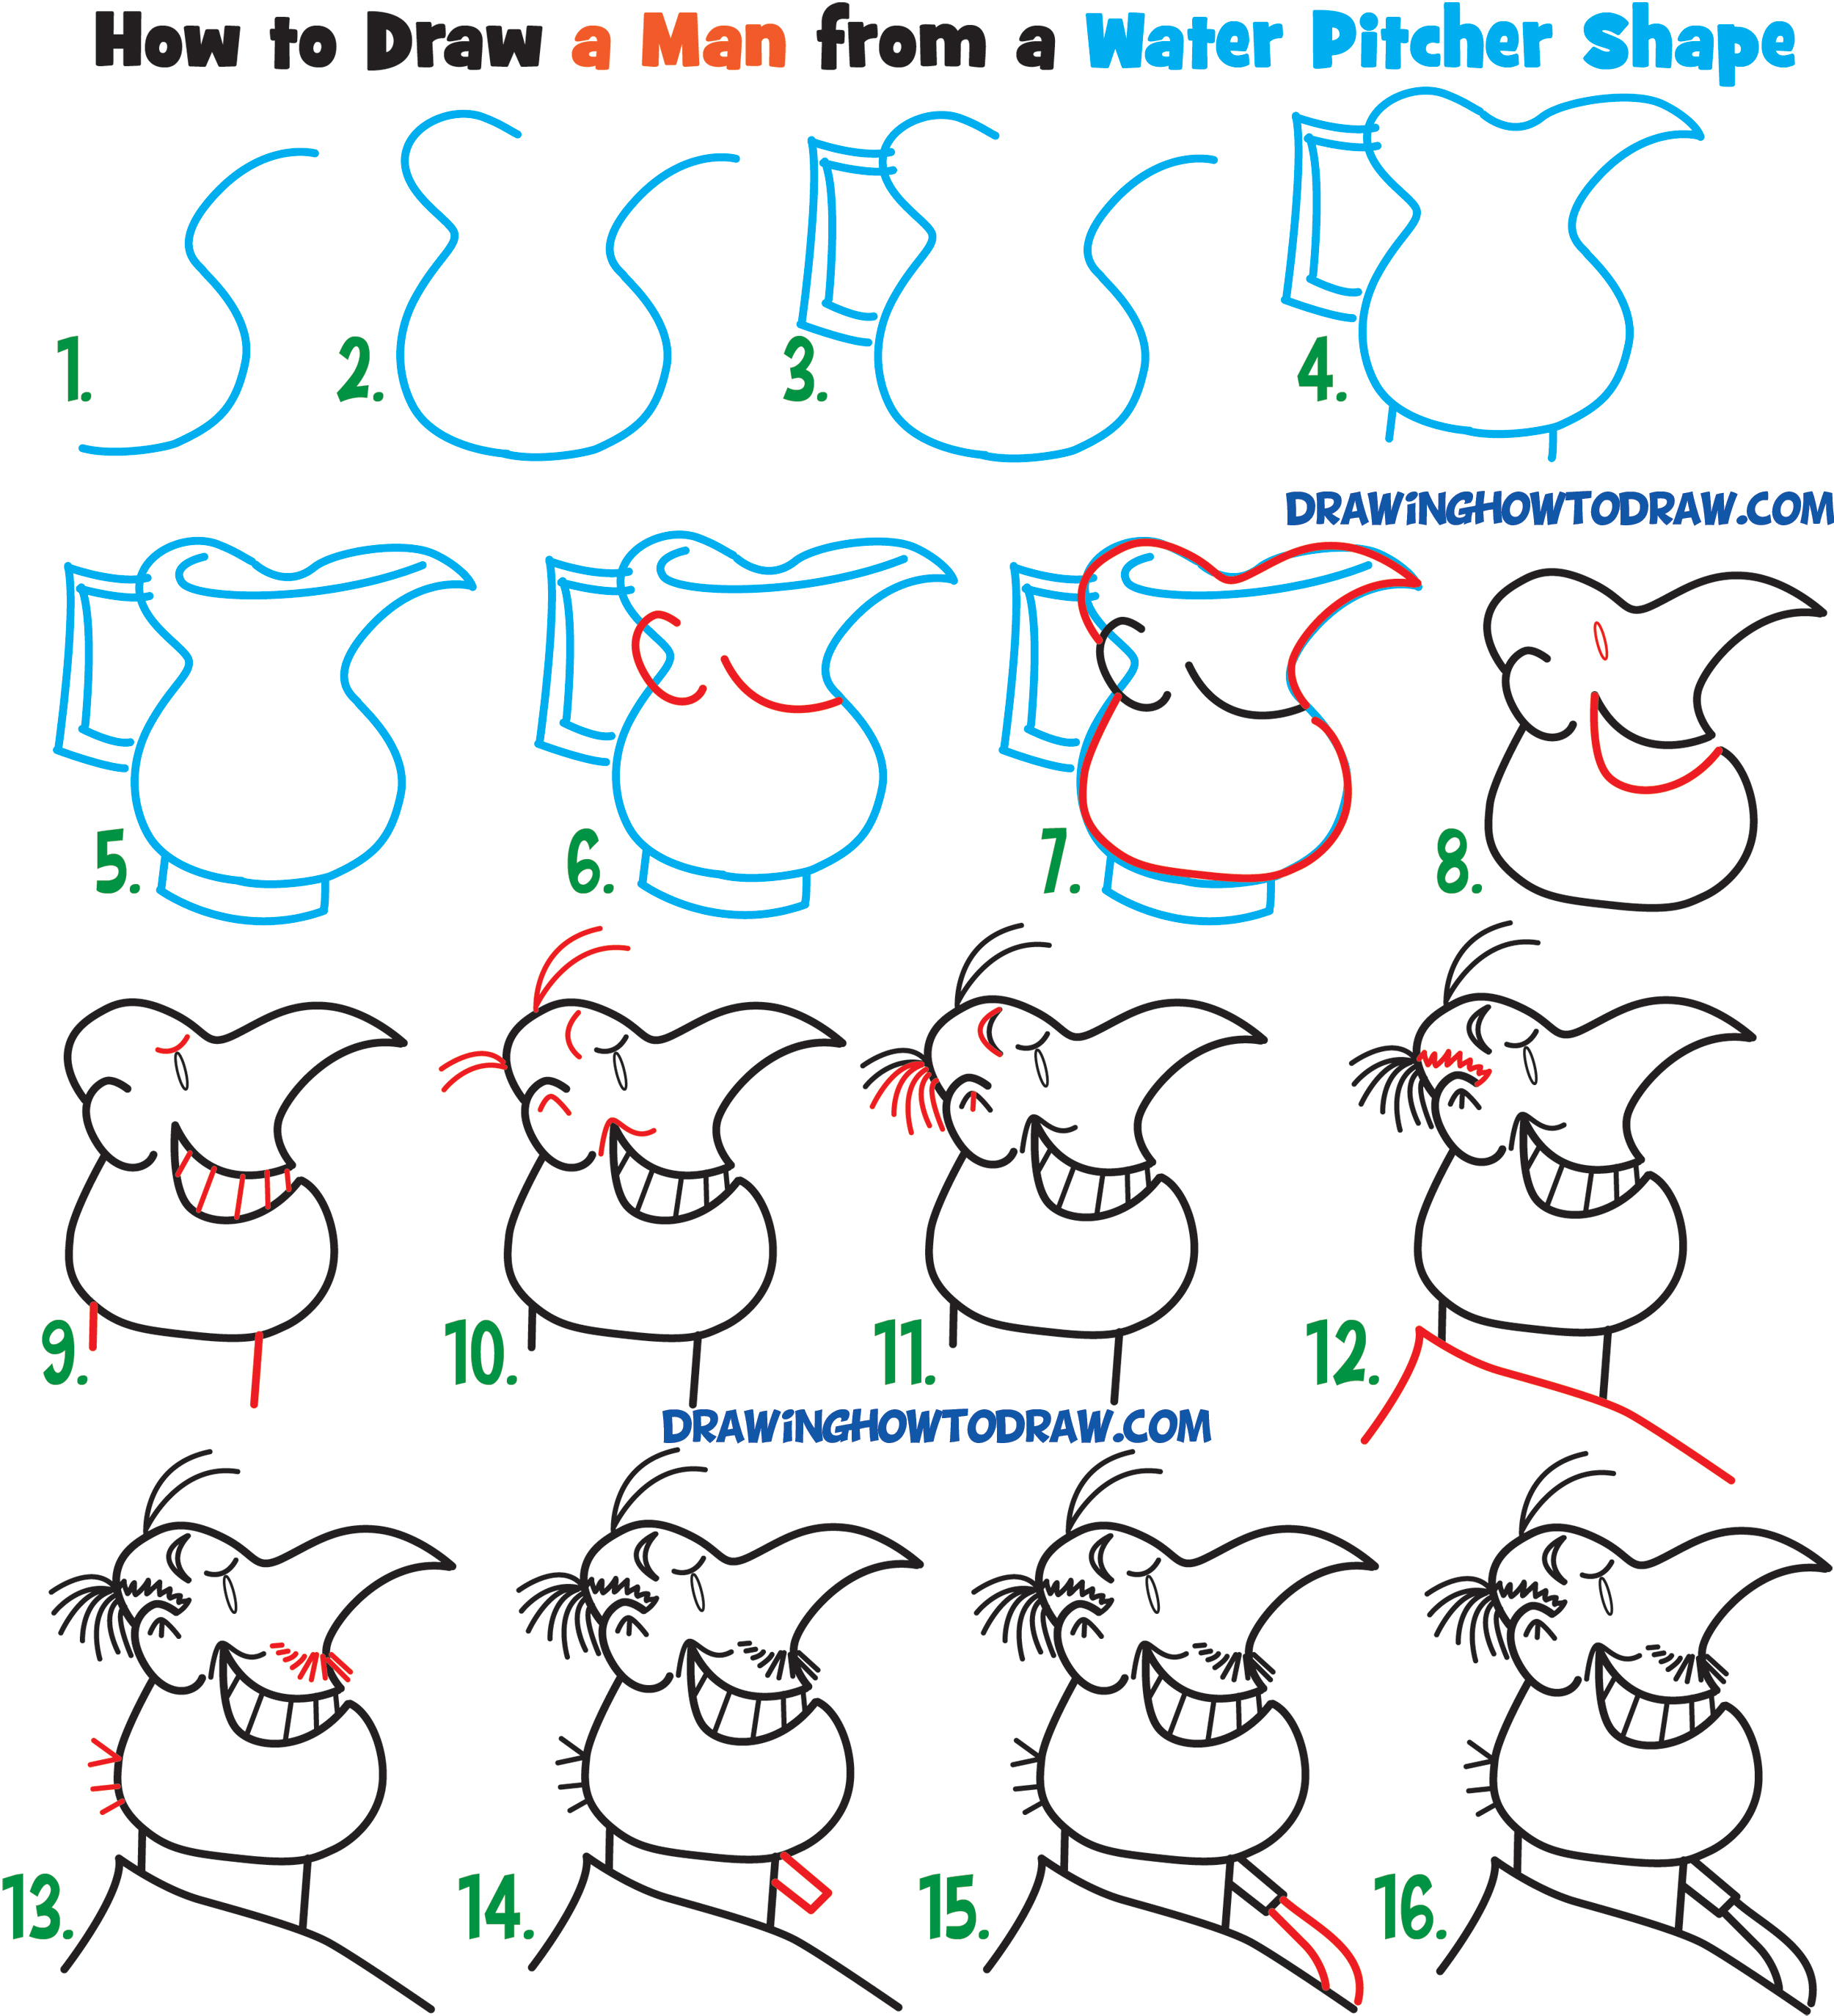 Tutorial #3: Draw a Cartoon Man's Face from the Side / Profile View from a Water Pitcher